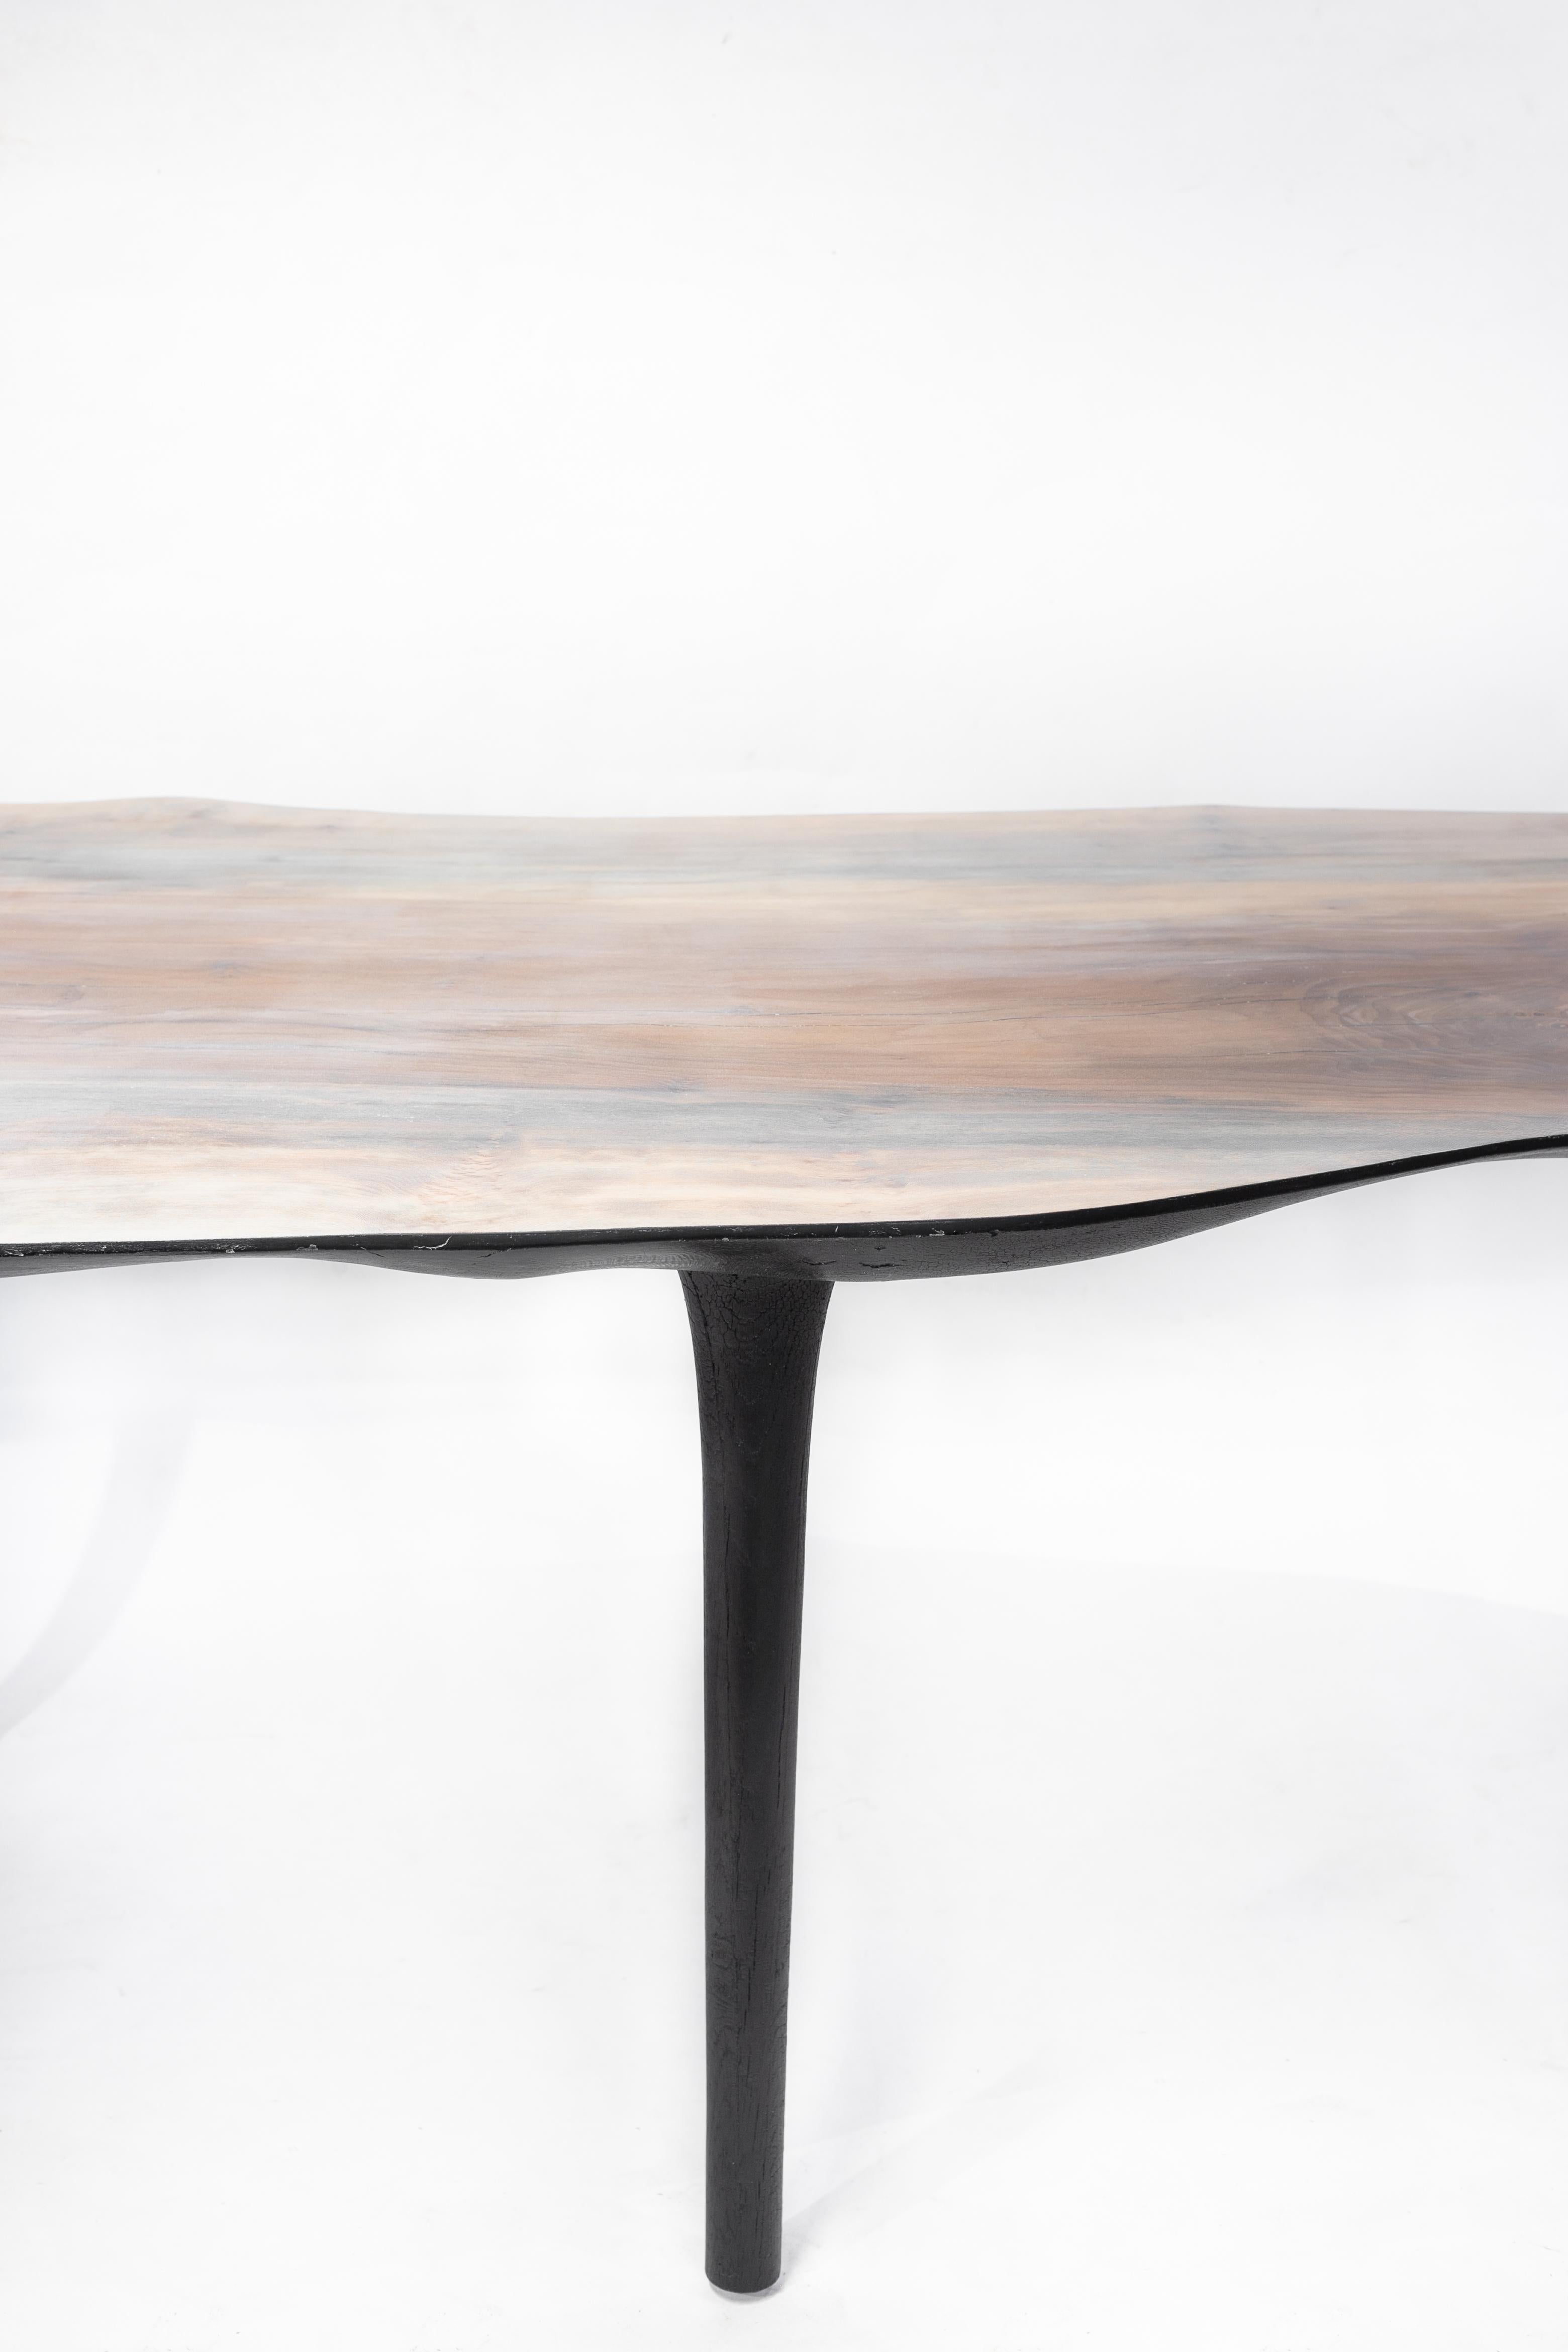 French Unique Sculptural Dining Table Signed by Cedric Breisacher